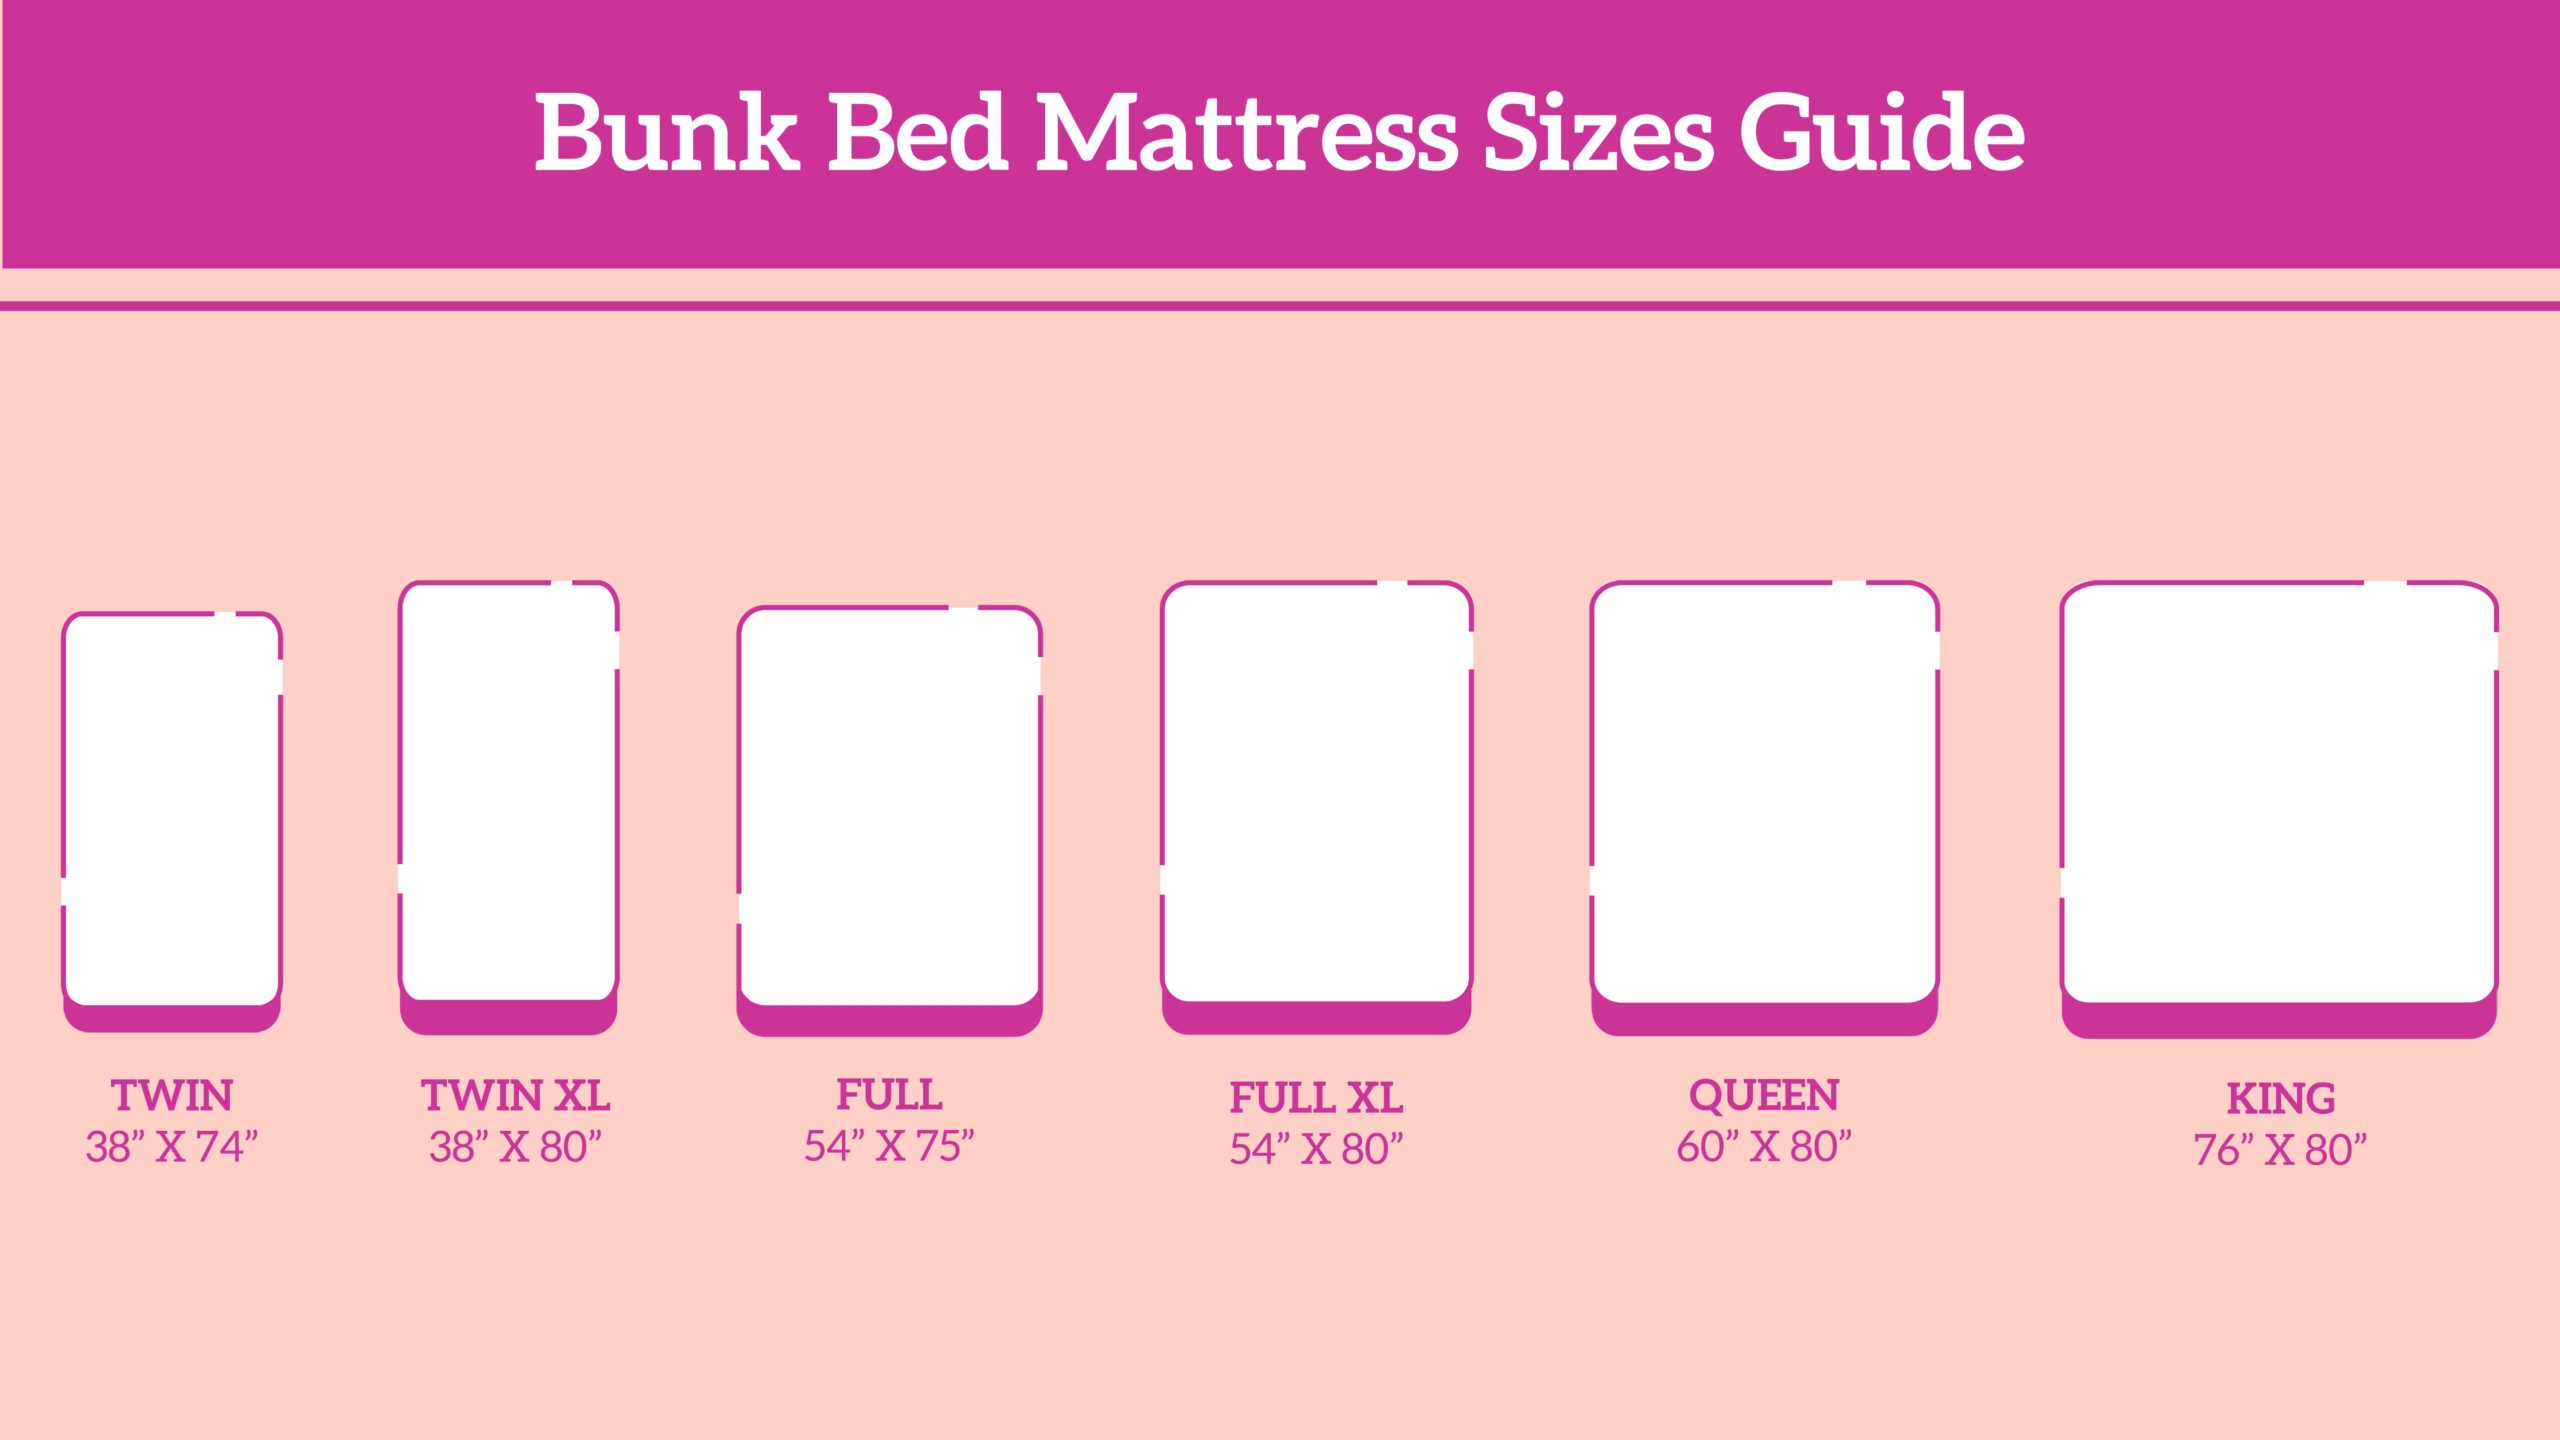 Bunk Bed Mattress Sizes Guide Eachnight, Length Of An Extra Long Twin Bed